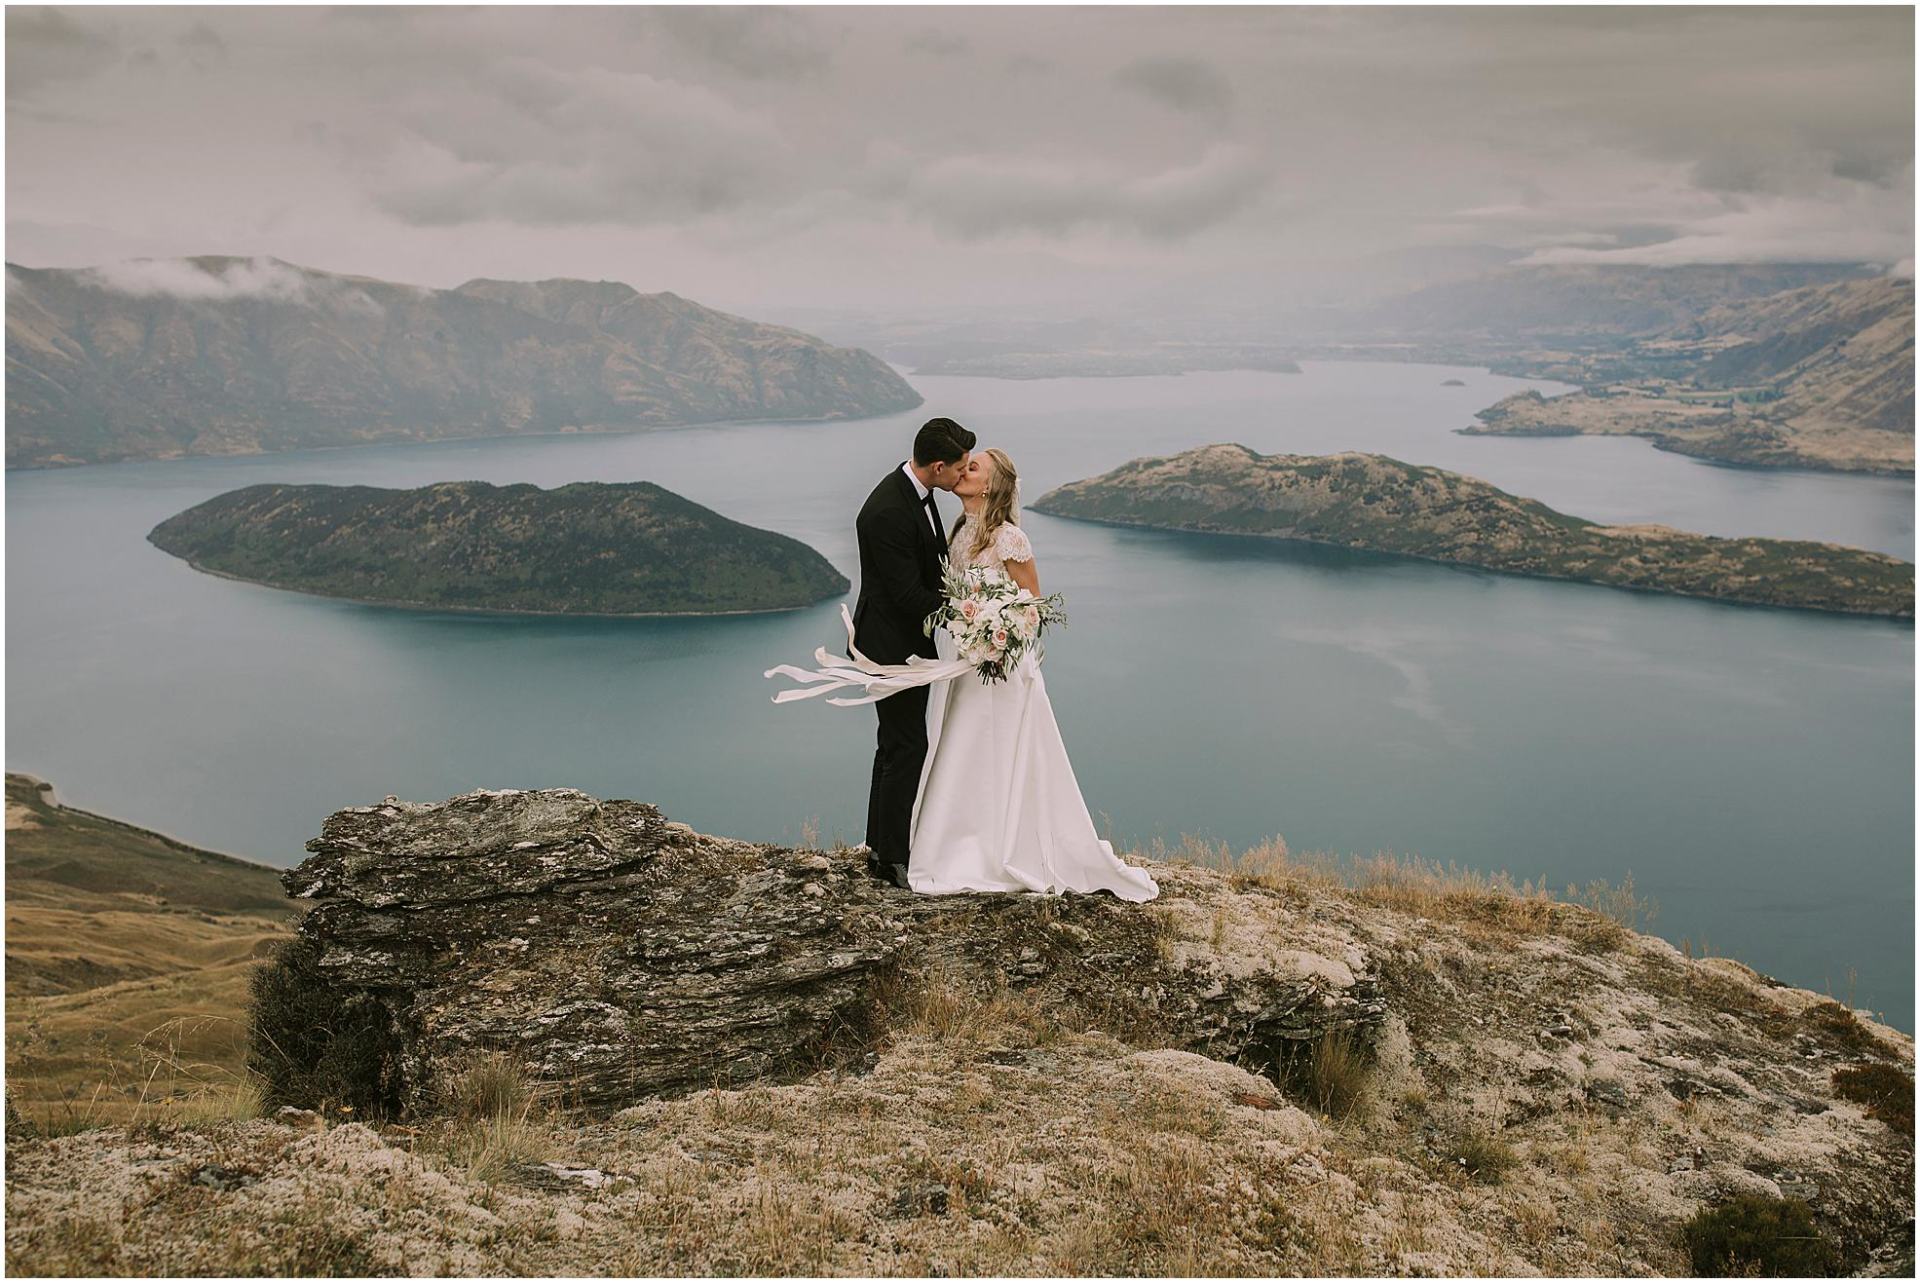 Charlotte Kiri Photography - Wedding Photography of a bride wearing a pretty lace capped-sleeved dress and holding a bouquet with ribbons that are floating in the wind, as she kisses her groom who wears a smart black suit on top of a rock that overlooks stunning lakes and mountains, in Rippon, Wanaka, New Zealand.